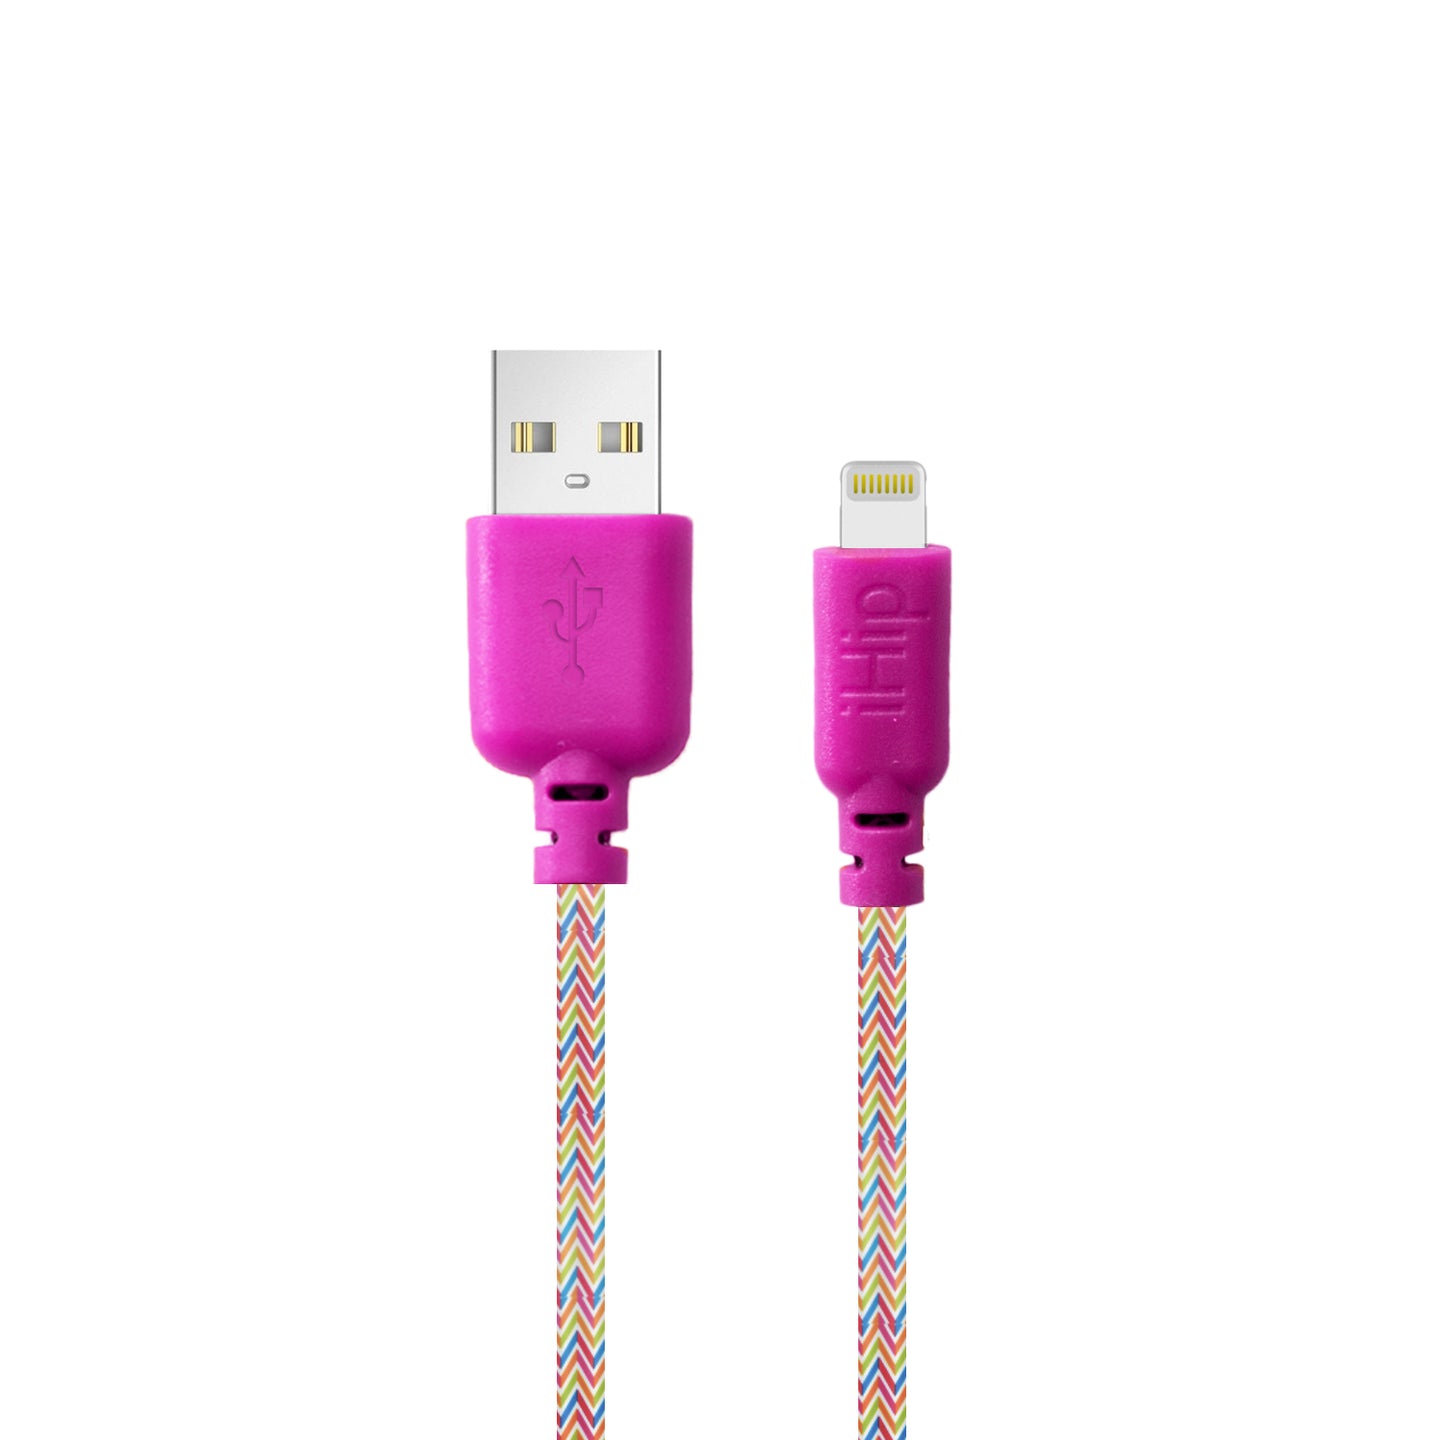 iHip Cute Cords 10ft  Rainbow Braided MFI Lighting USB Sync Cable Bend Test Certified - iPhone Charger Cable for iPhone/ iPad /iPod - iHip